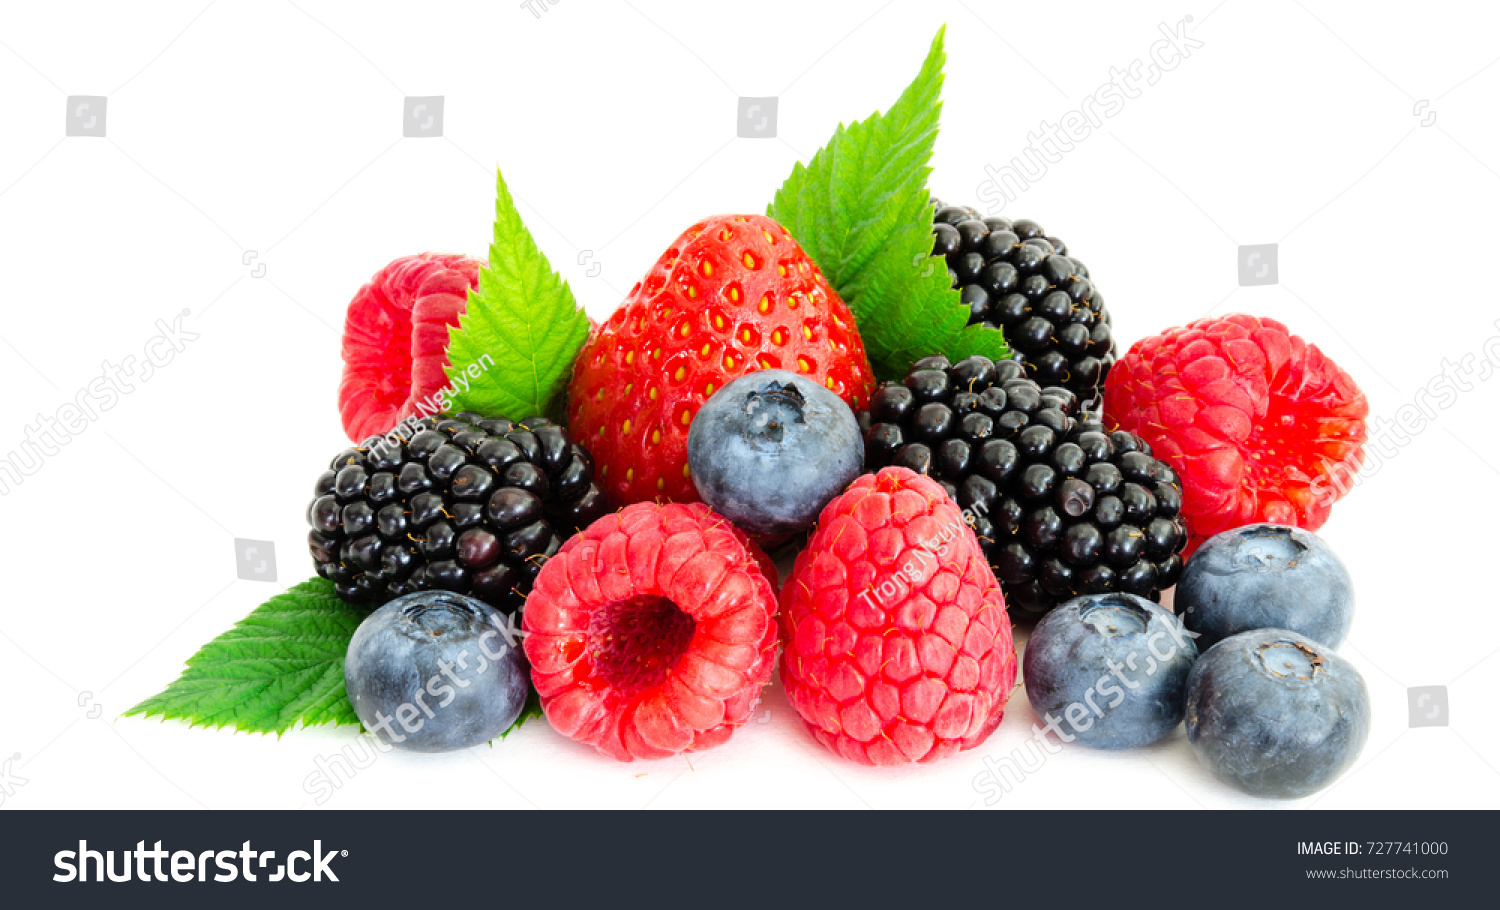 Close-up arrangement mixed, assorted berries including blackberries, strawberry, blueberry, raspberries and fresh leaf isolated on white. Colorful, healthy concept. Black, blue, red, green. Panorama #727741000